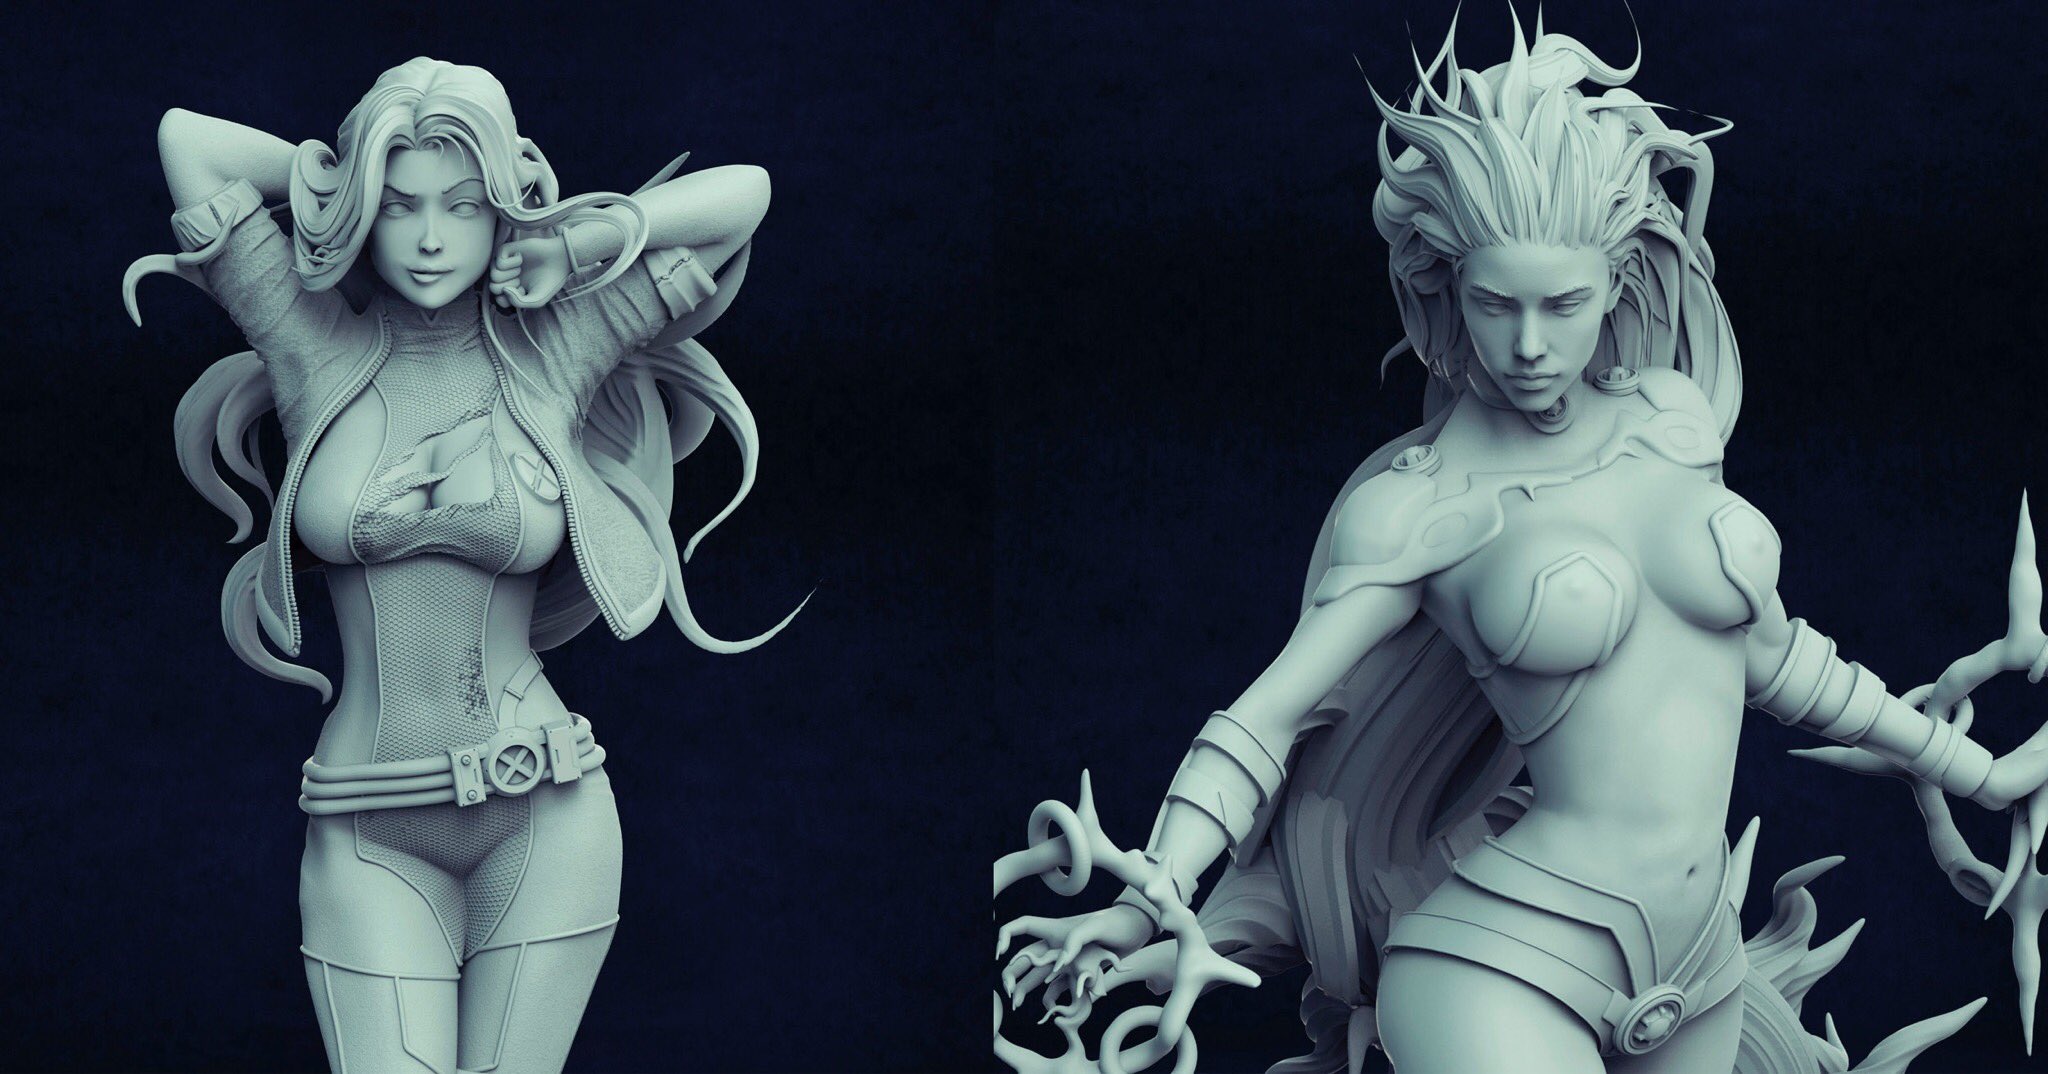 80 LEVEL ar Twitter: "Nicely detailed 3D sculptures by @ruso3d made wi...